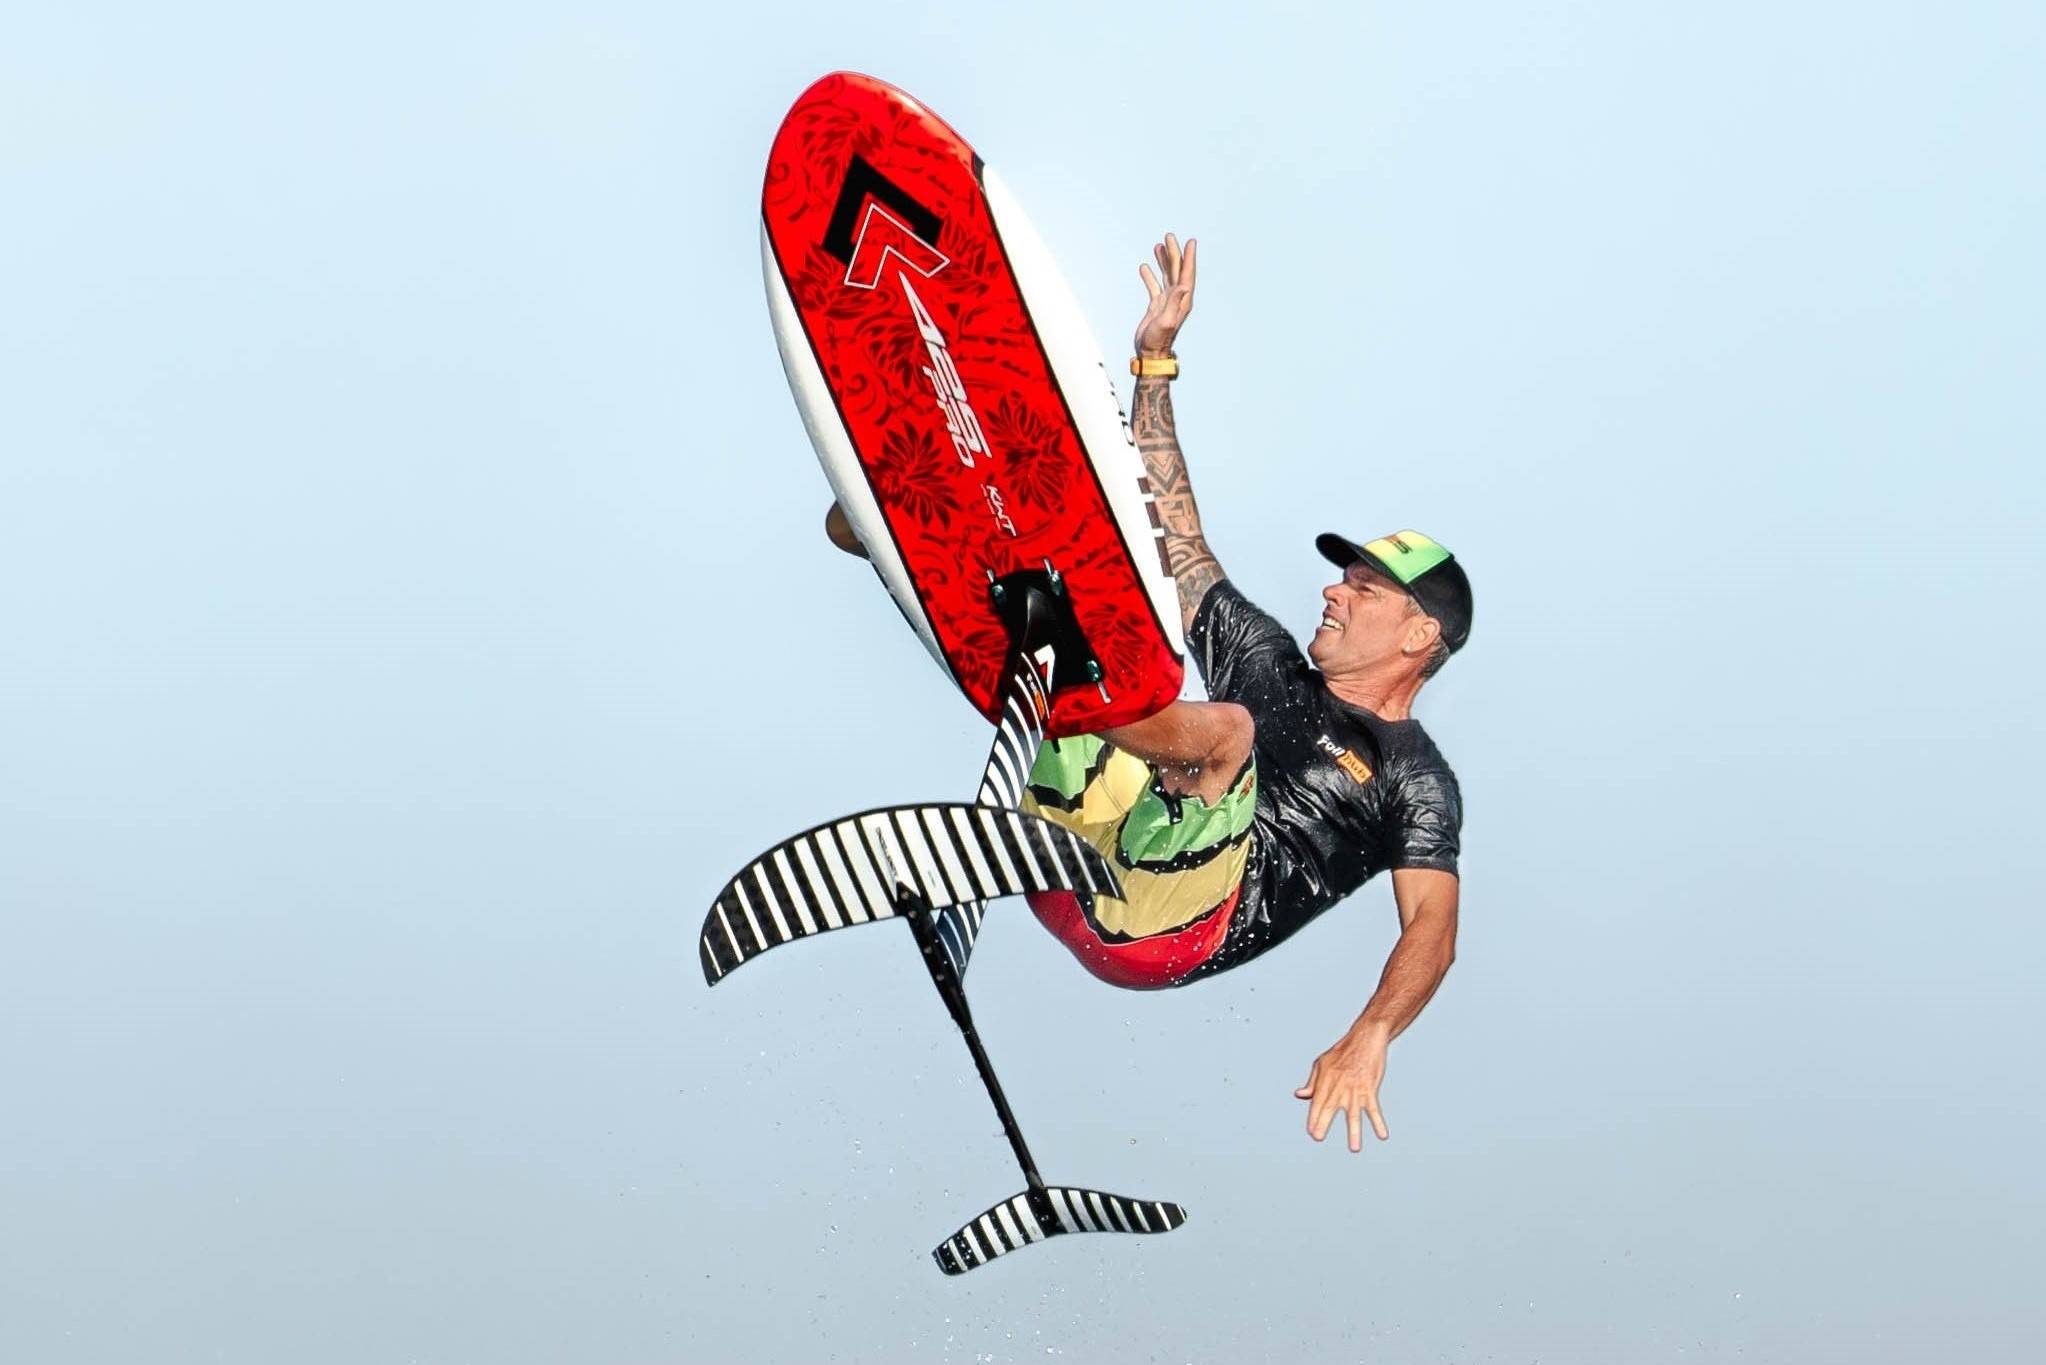 425pro K.W.T. board which stands for Kite foil, Wake foil and Tow foil board. A man in action. 